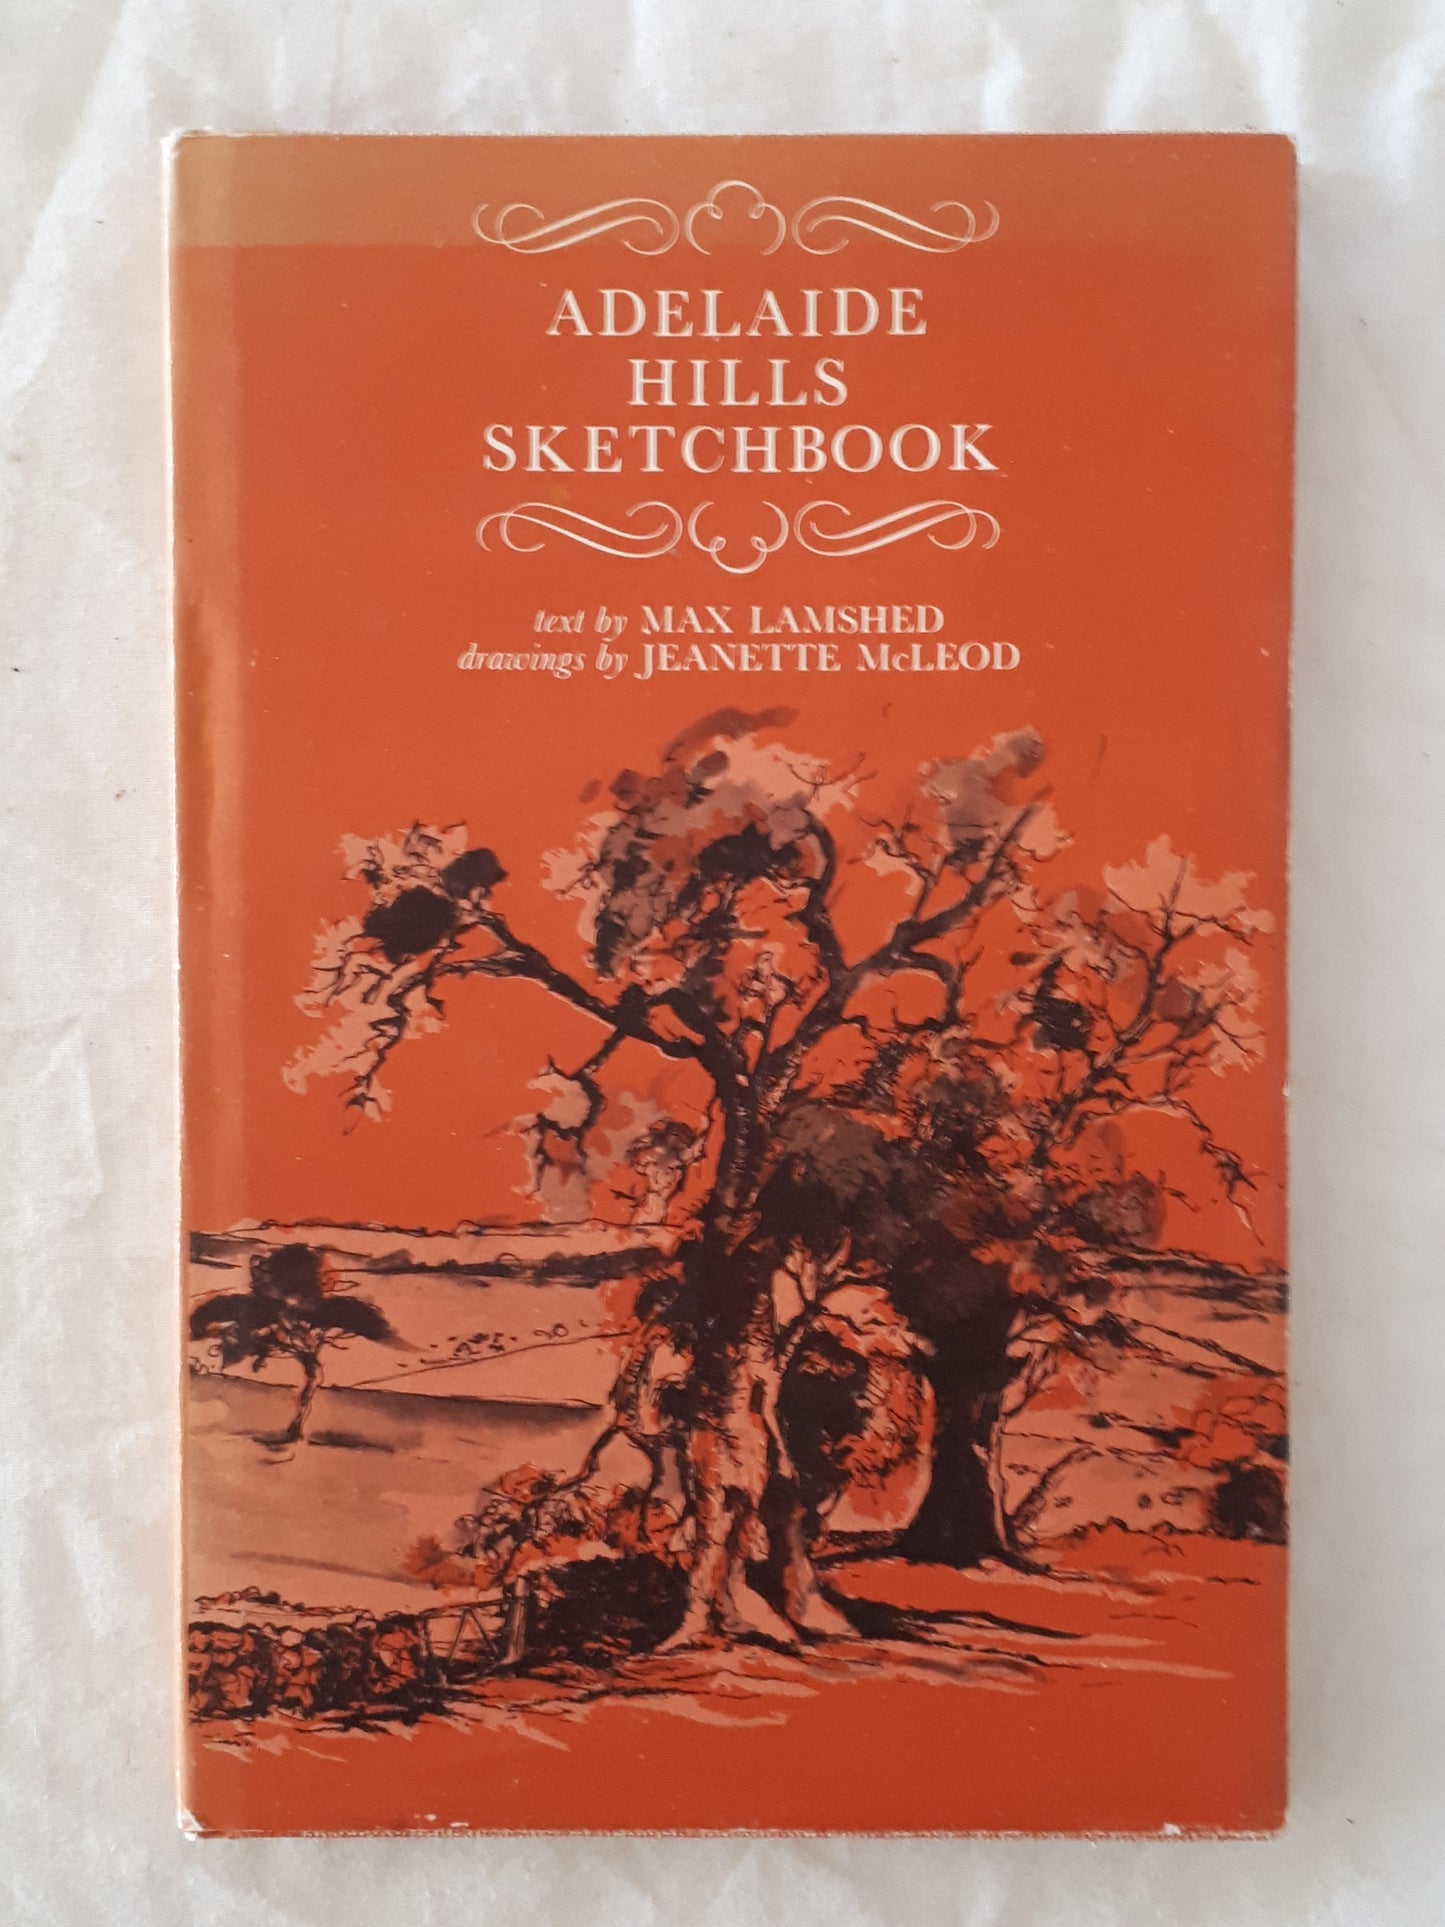 Adelaide Hills Sketchbook by Max Lamshed and Jeanette McLeod